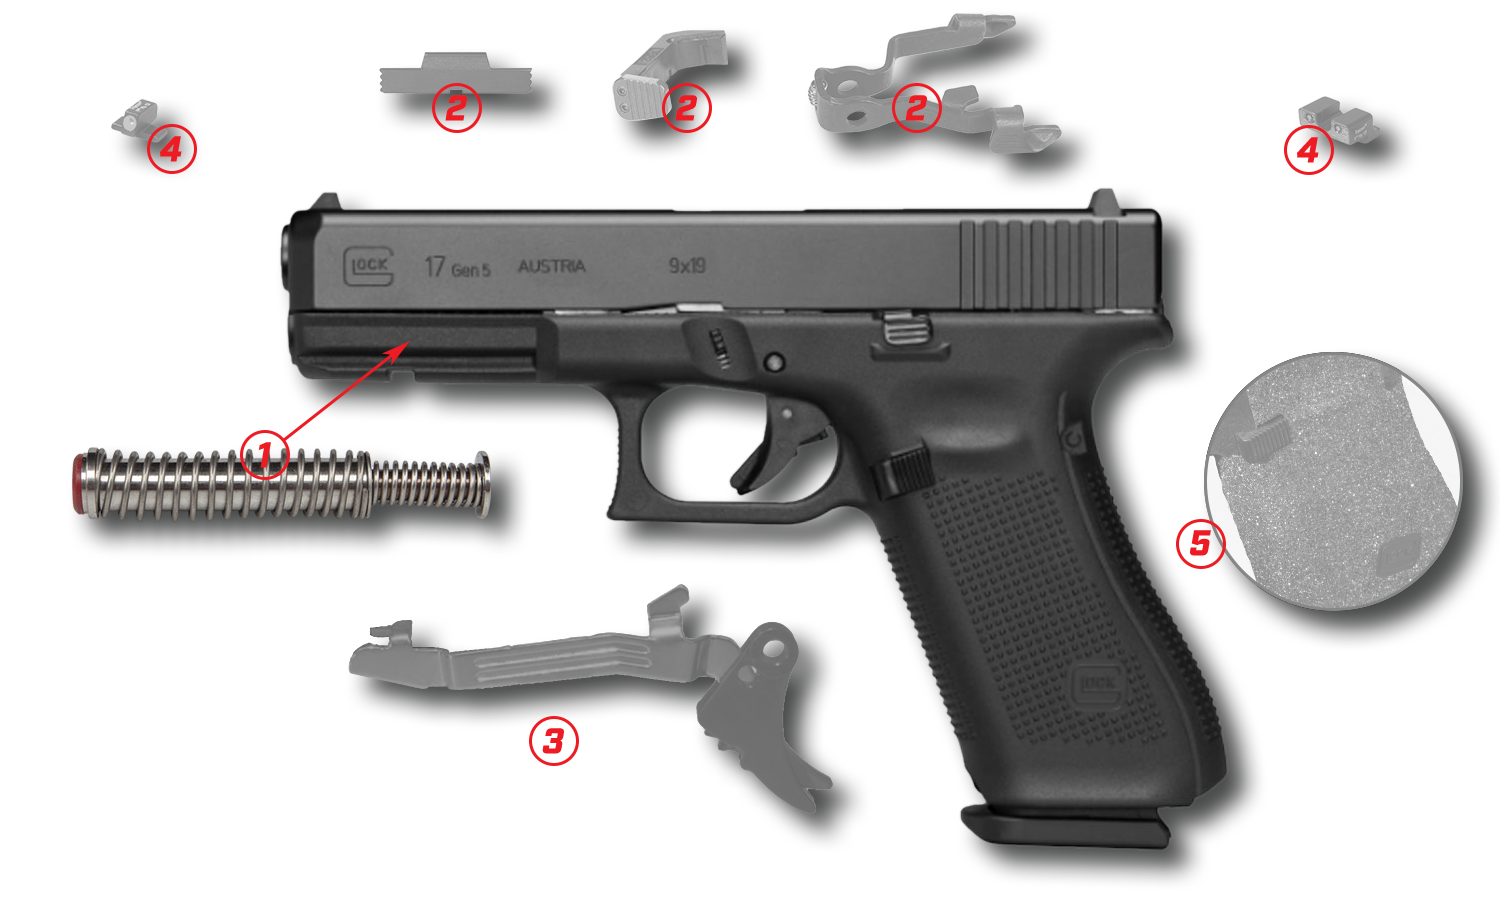 Lenny Magill's Top 5 Upgrades for your Glock!